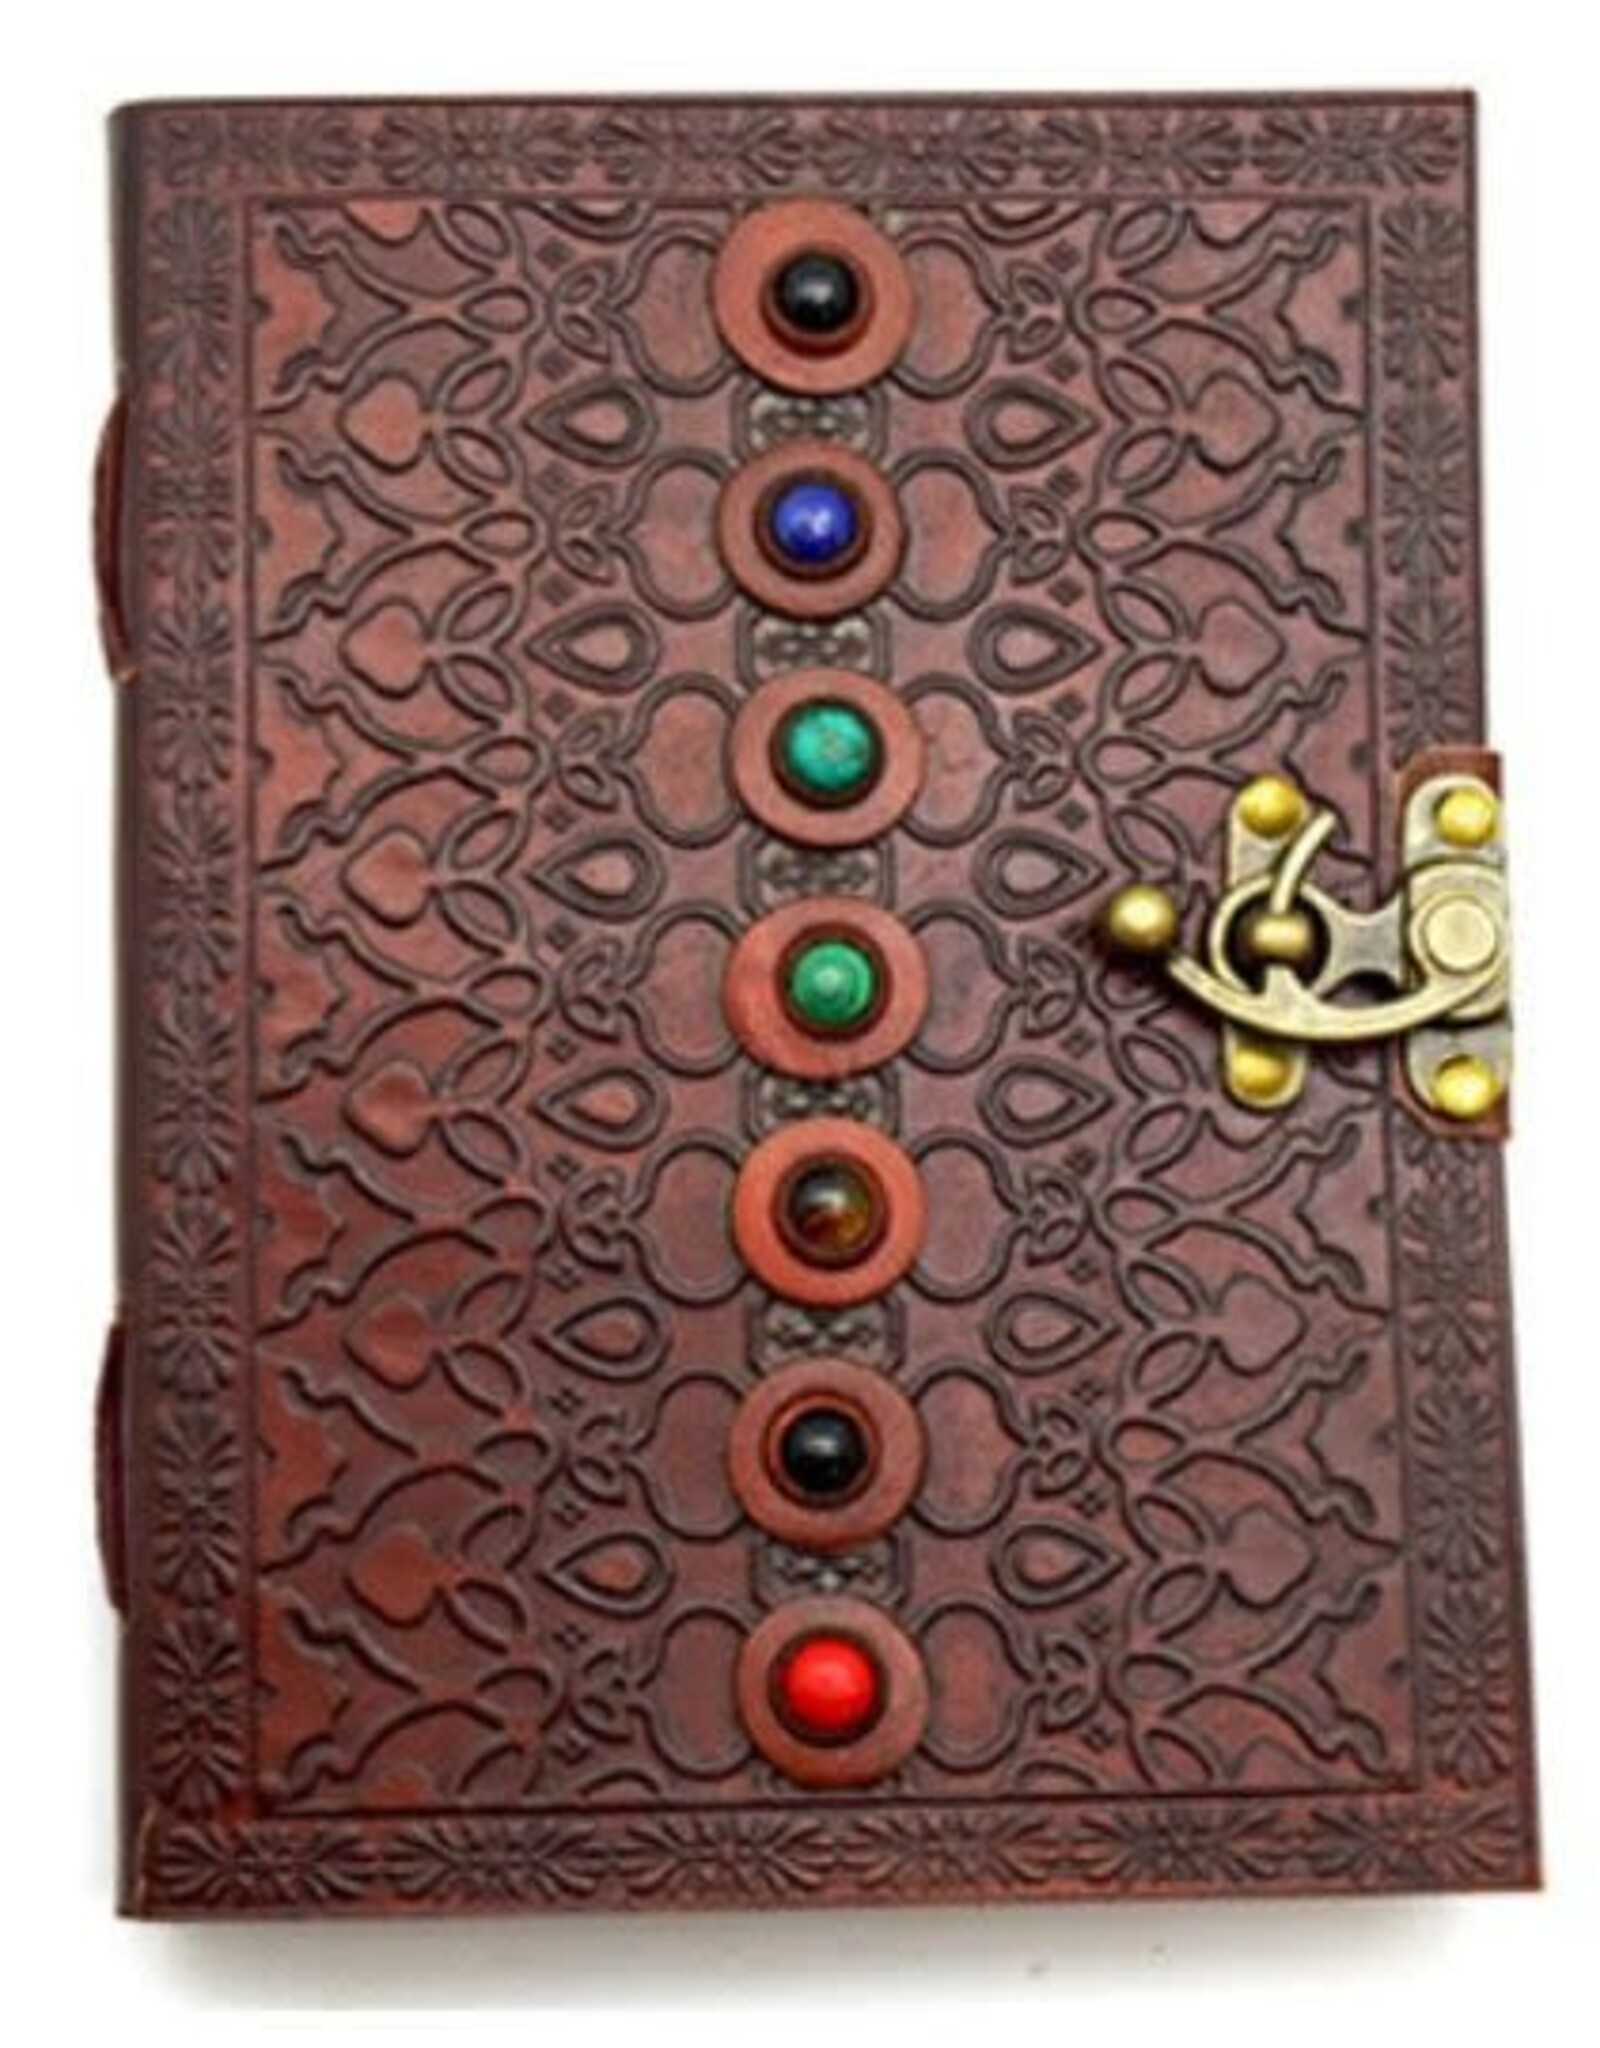 Fantasy Gifts Leather Journal with Chakra Stones 6"x 8"